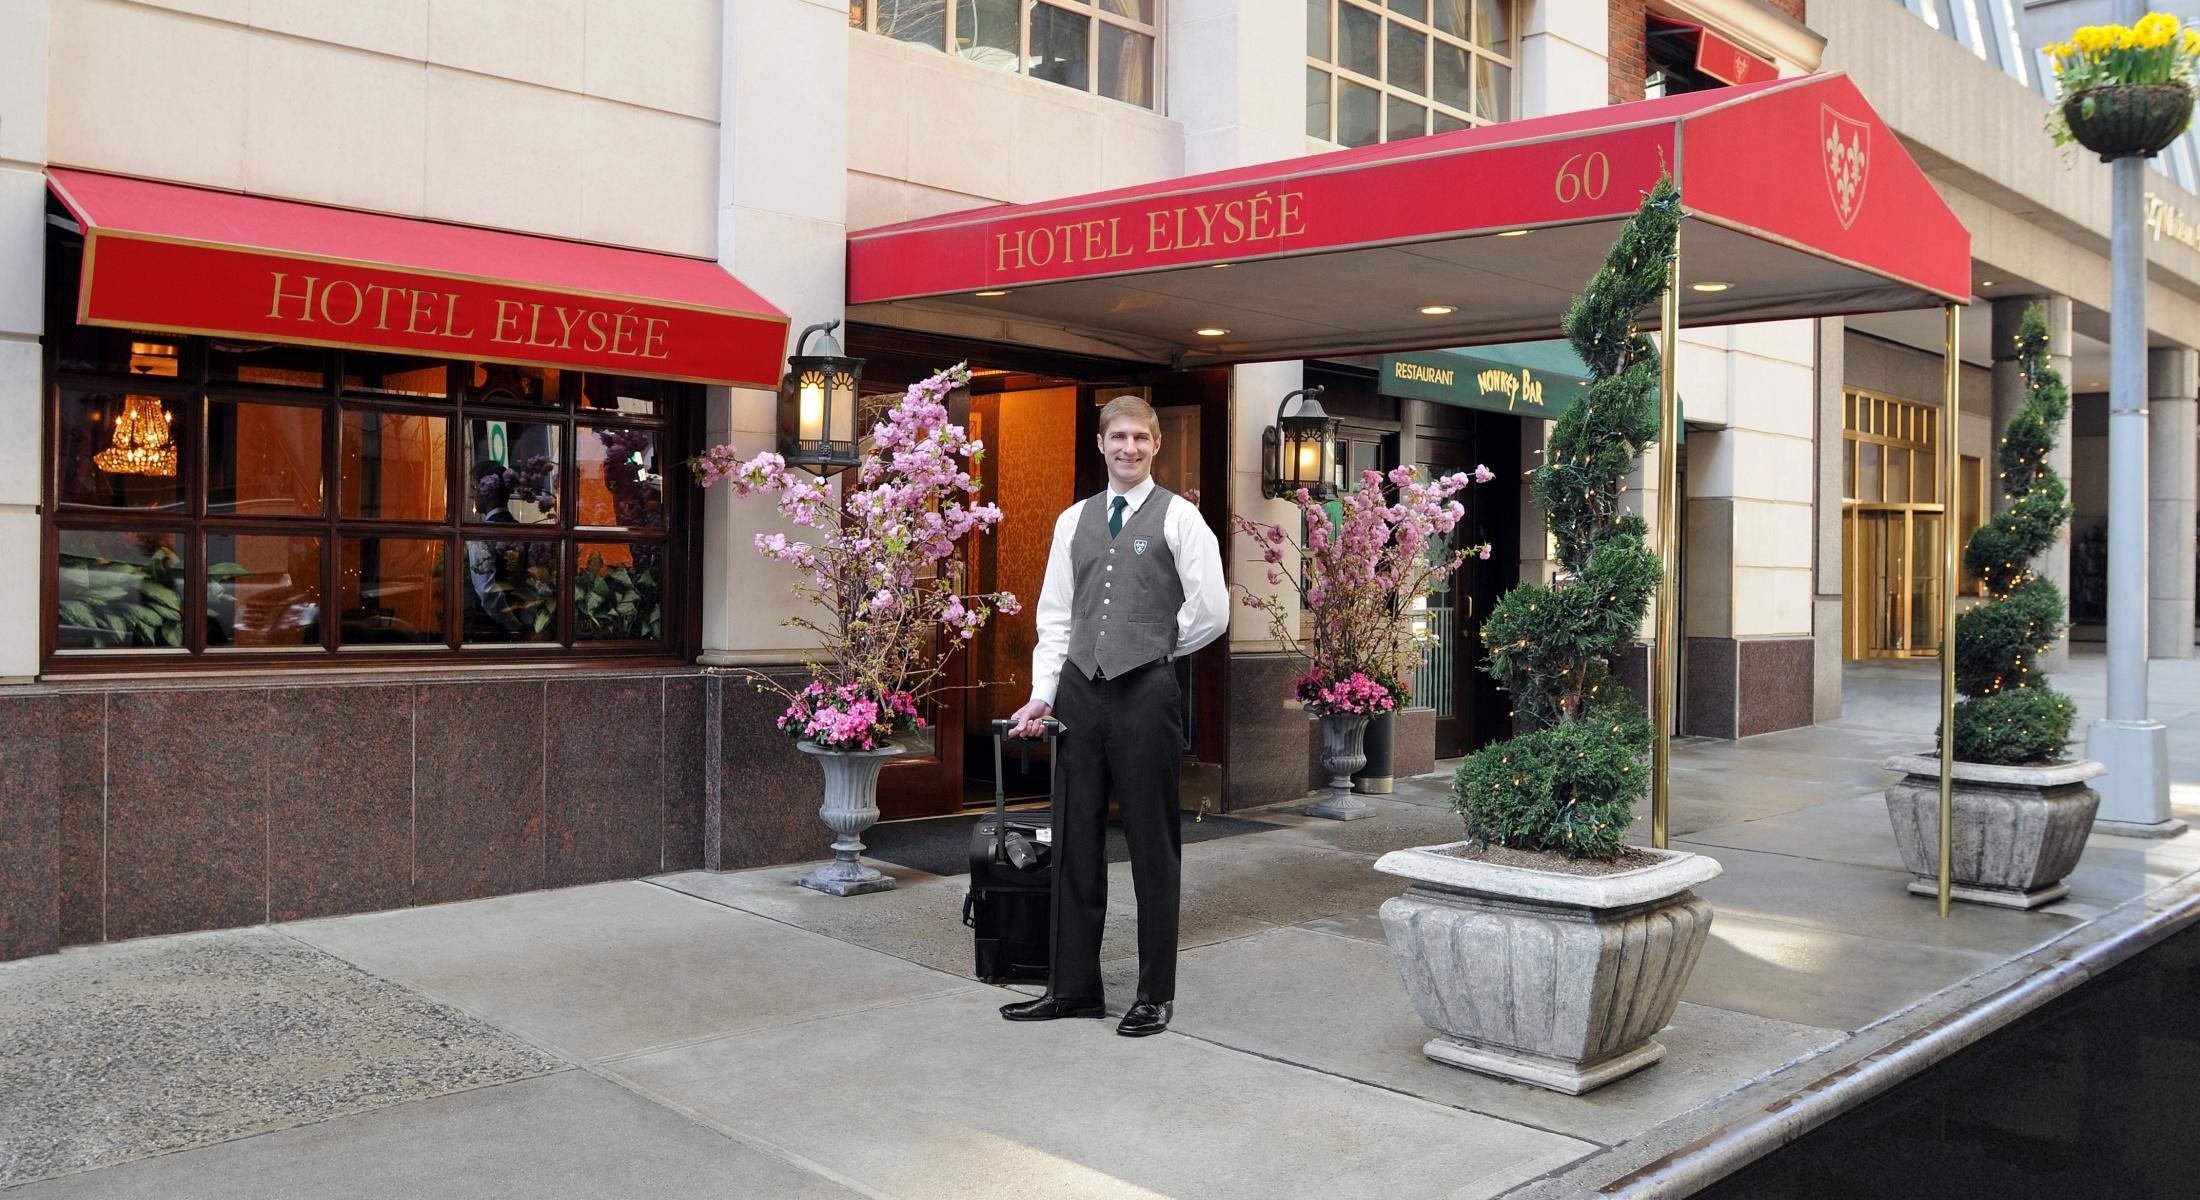 The Hotel Elysée is located on East 54th Street between Park and Madison Avenues.